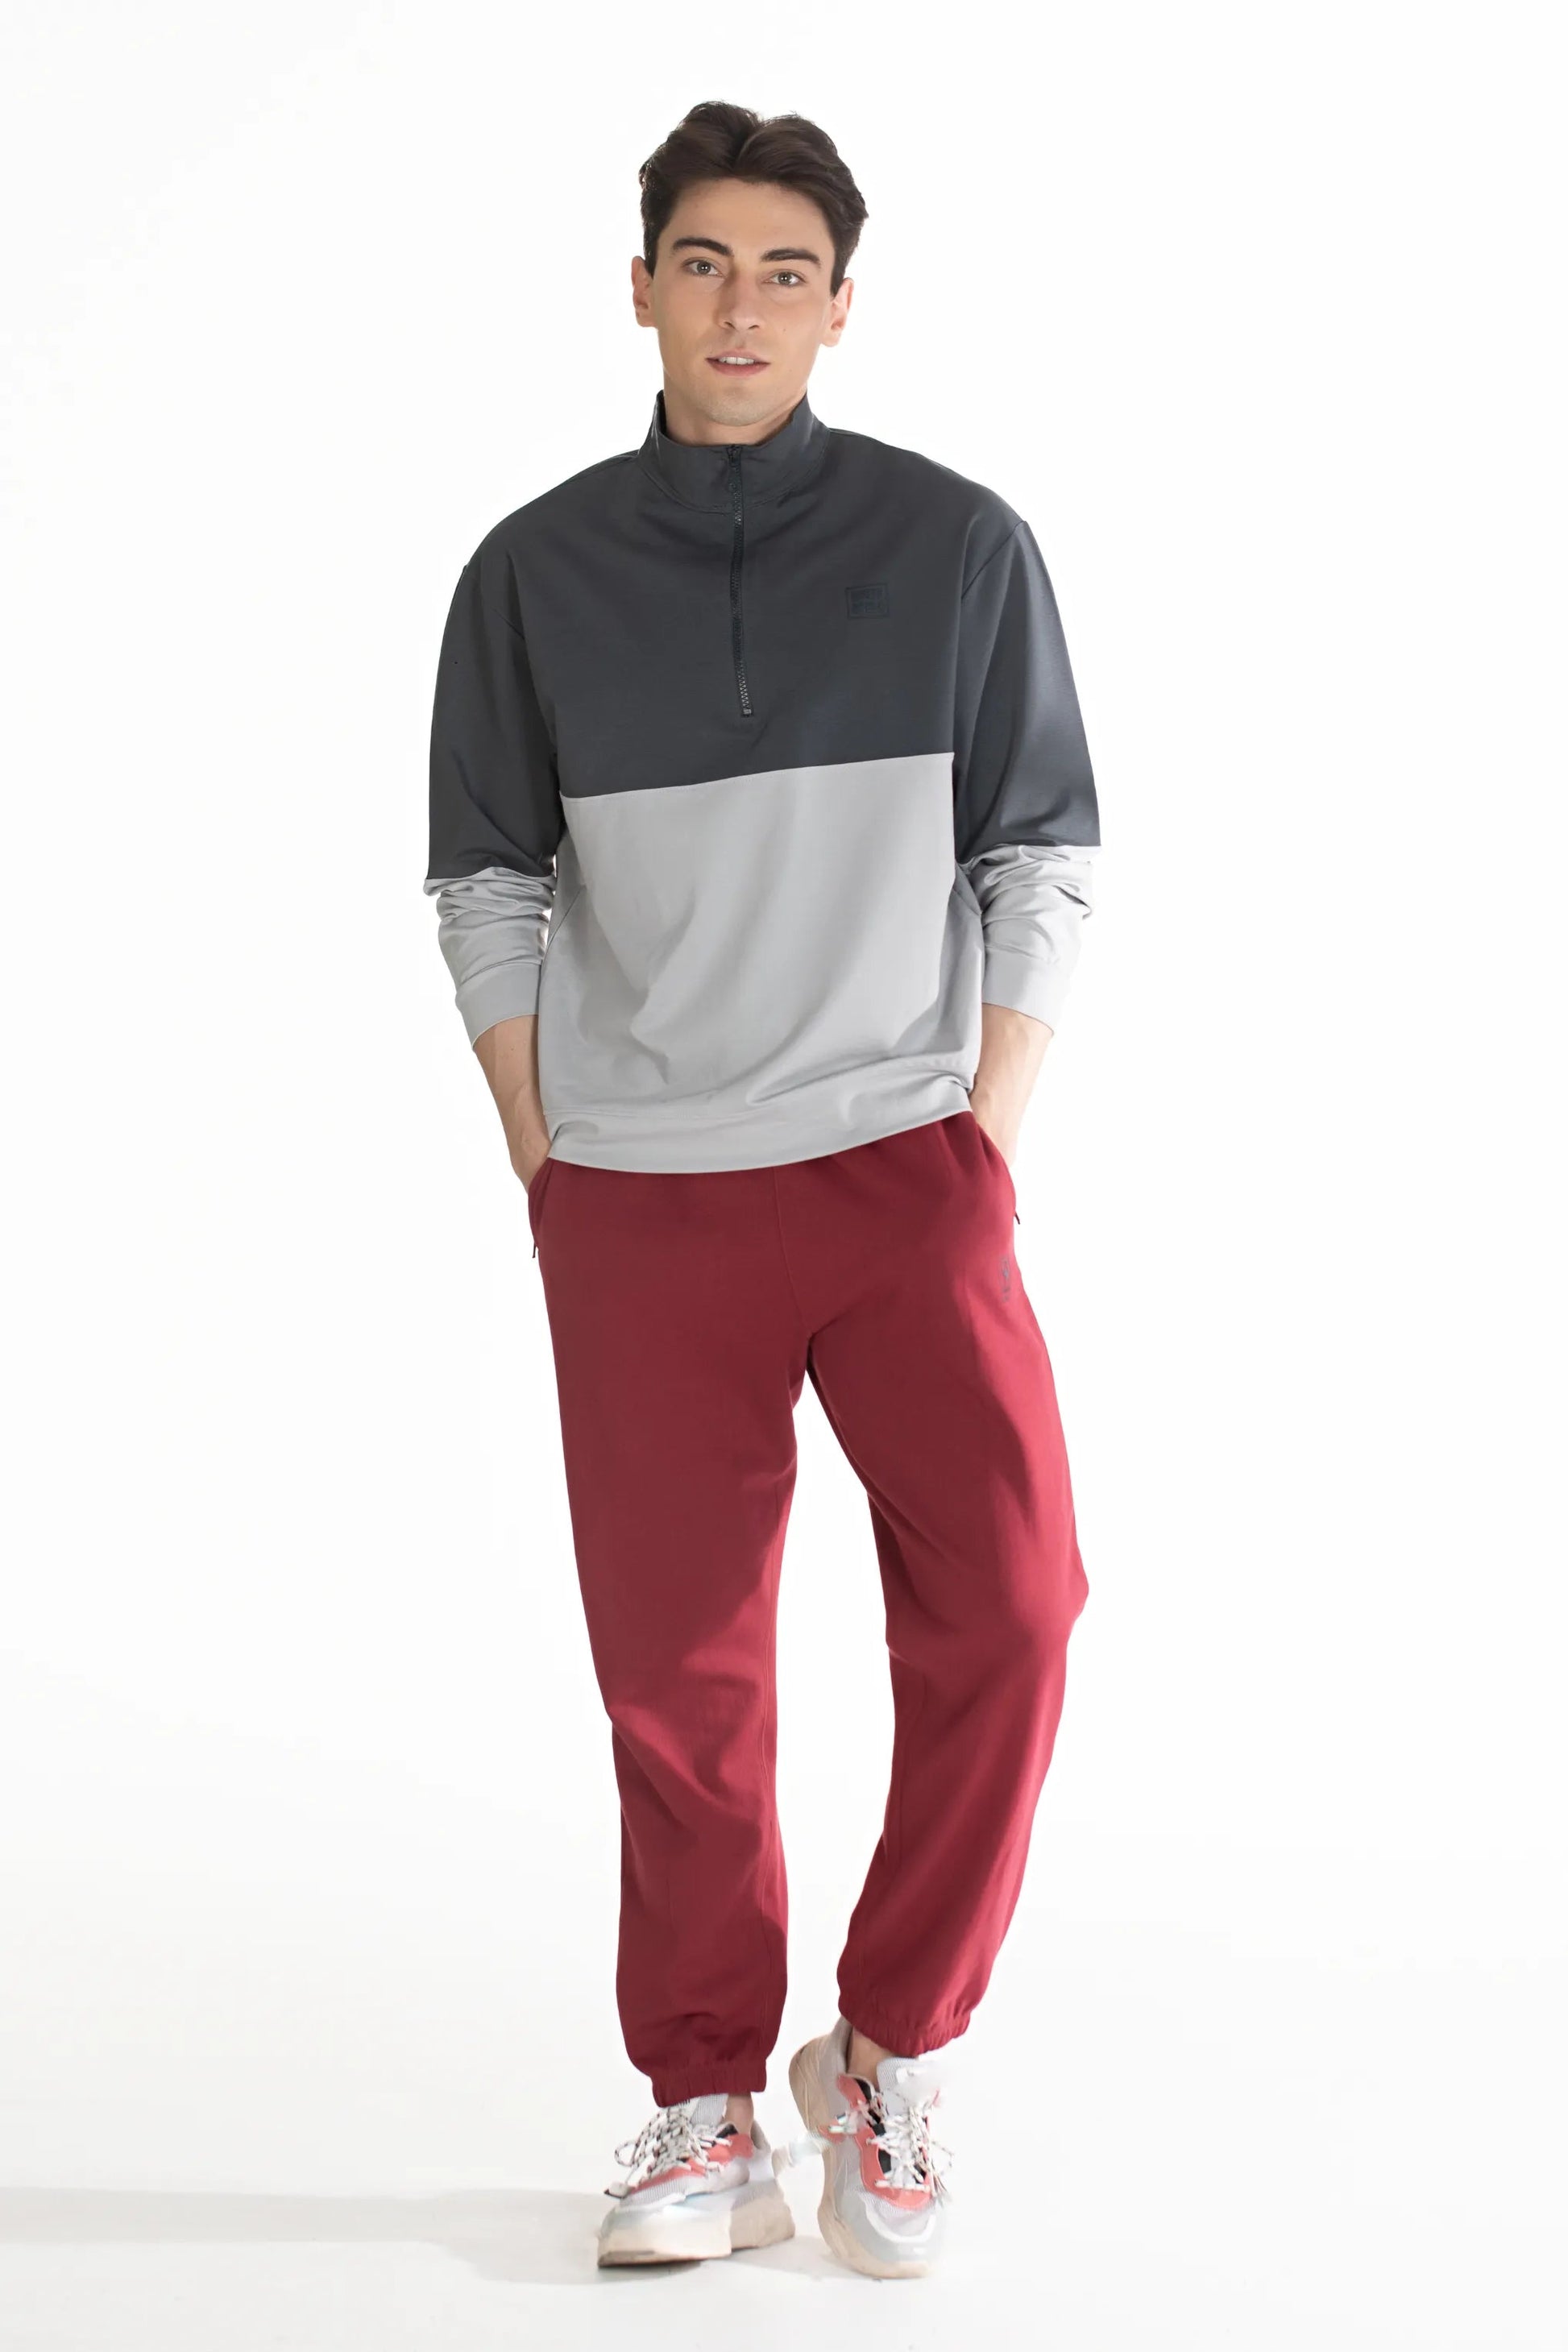 Buy Solid Knit Cotton Joggers Online